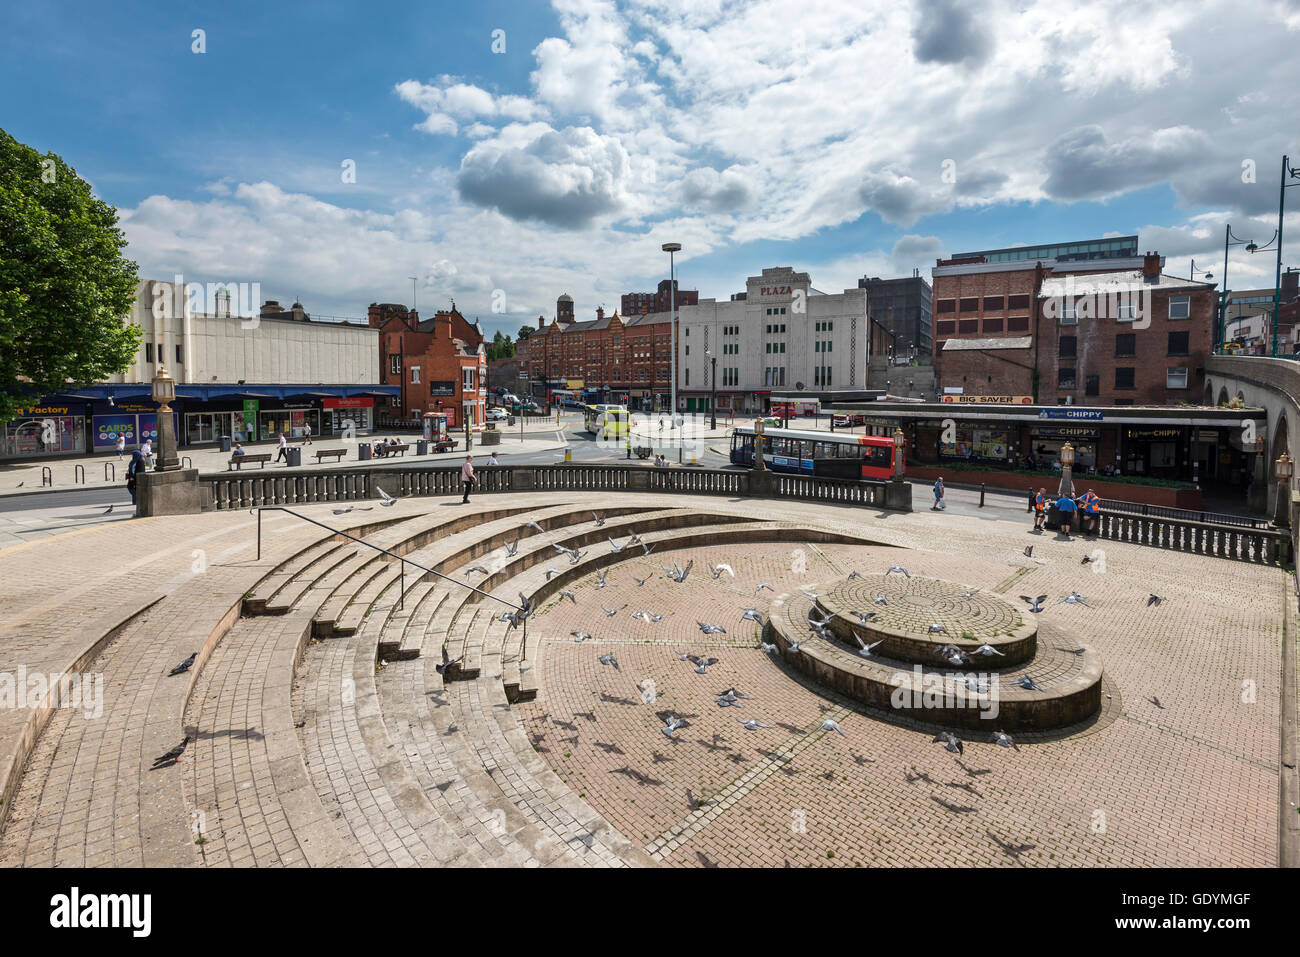 Pigeons flying over Mersey square in the town of Stockport, Greater Manchester, England. Stock Photo